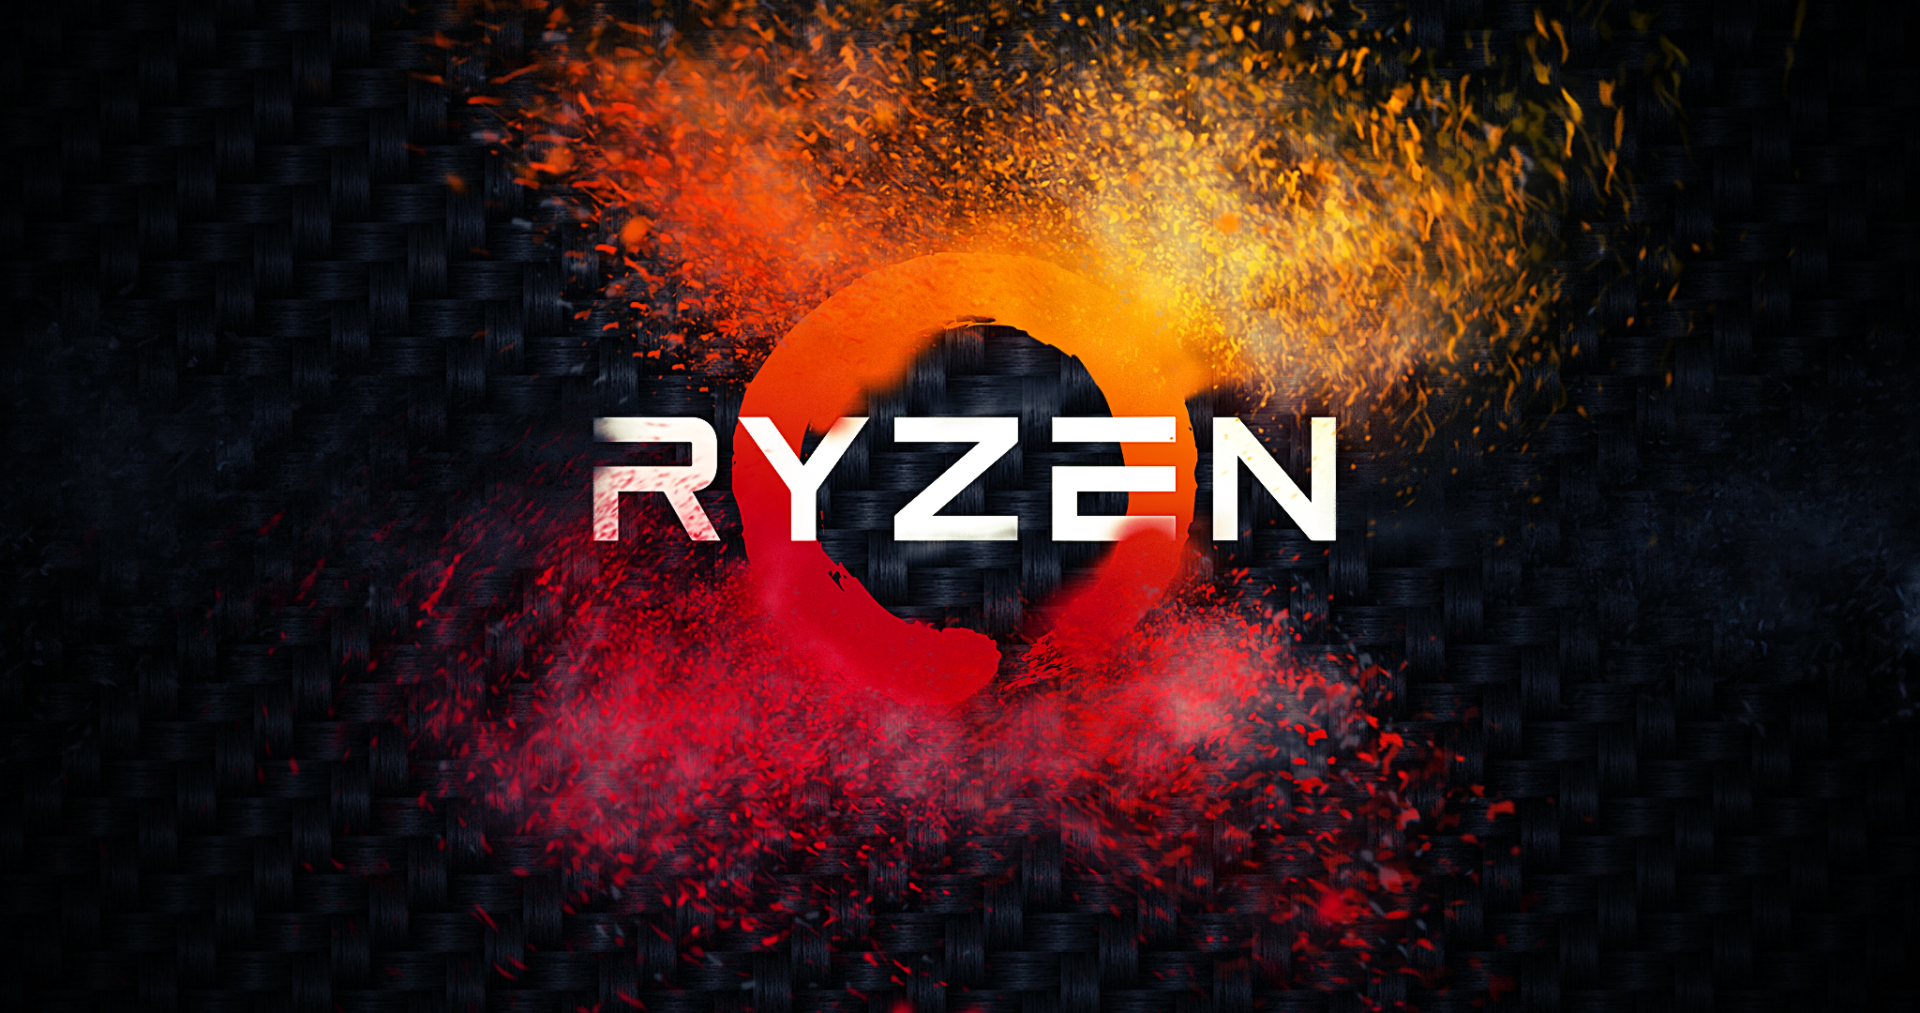 Featured image of post Wallpaper Btr Ryzen Hd 1920x1080 logo of amd fx wallpaper hd background wallpapers free amazing cool tablet 4k high definition 1920 1080 wallpaper hd